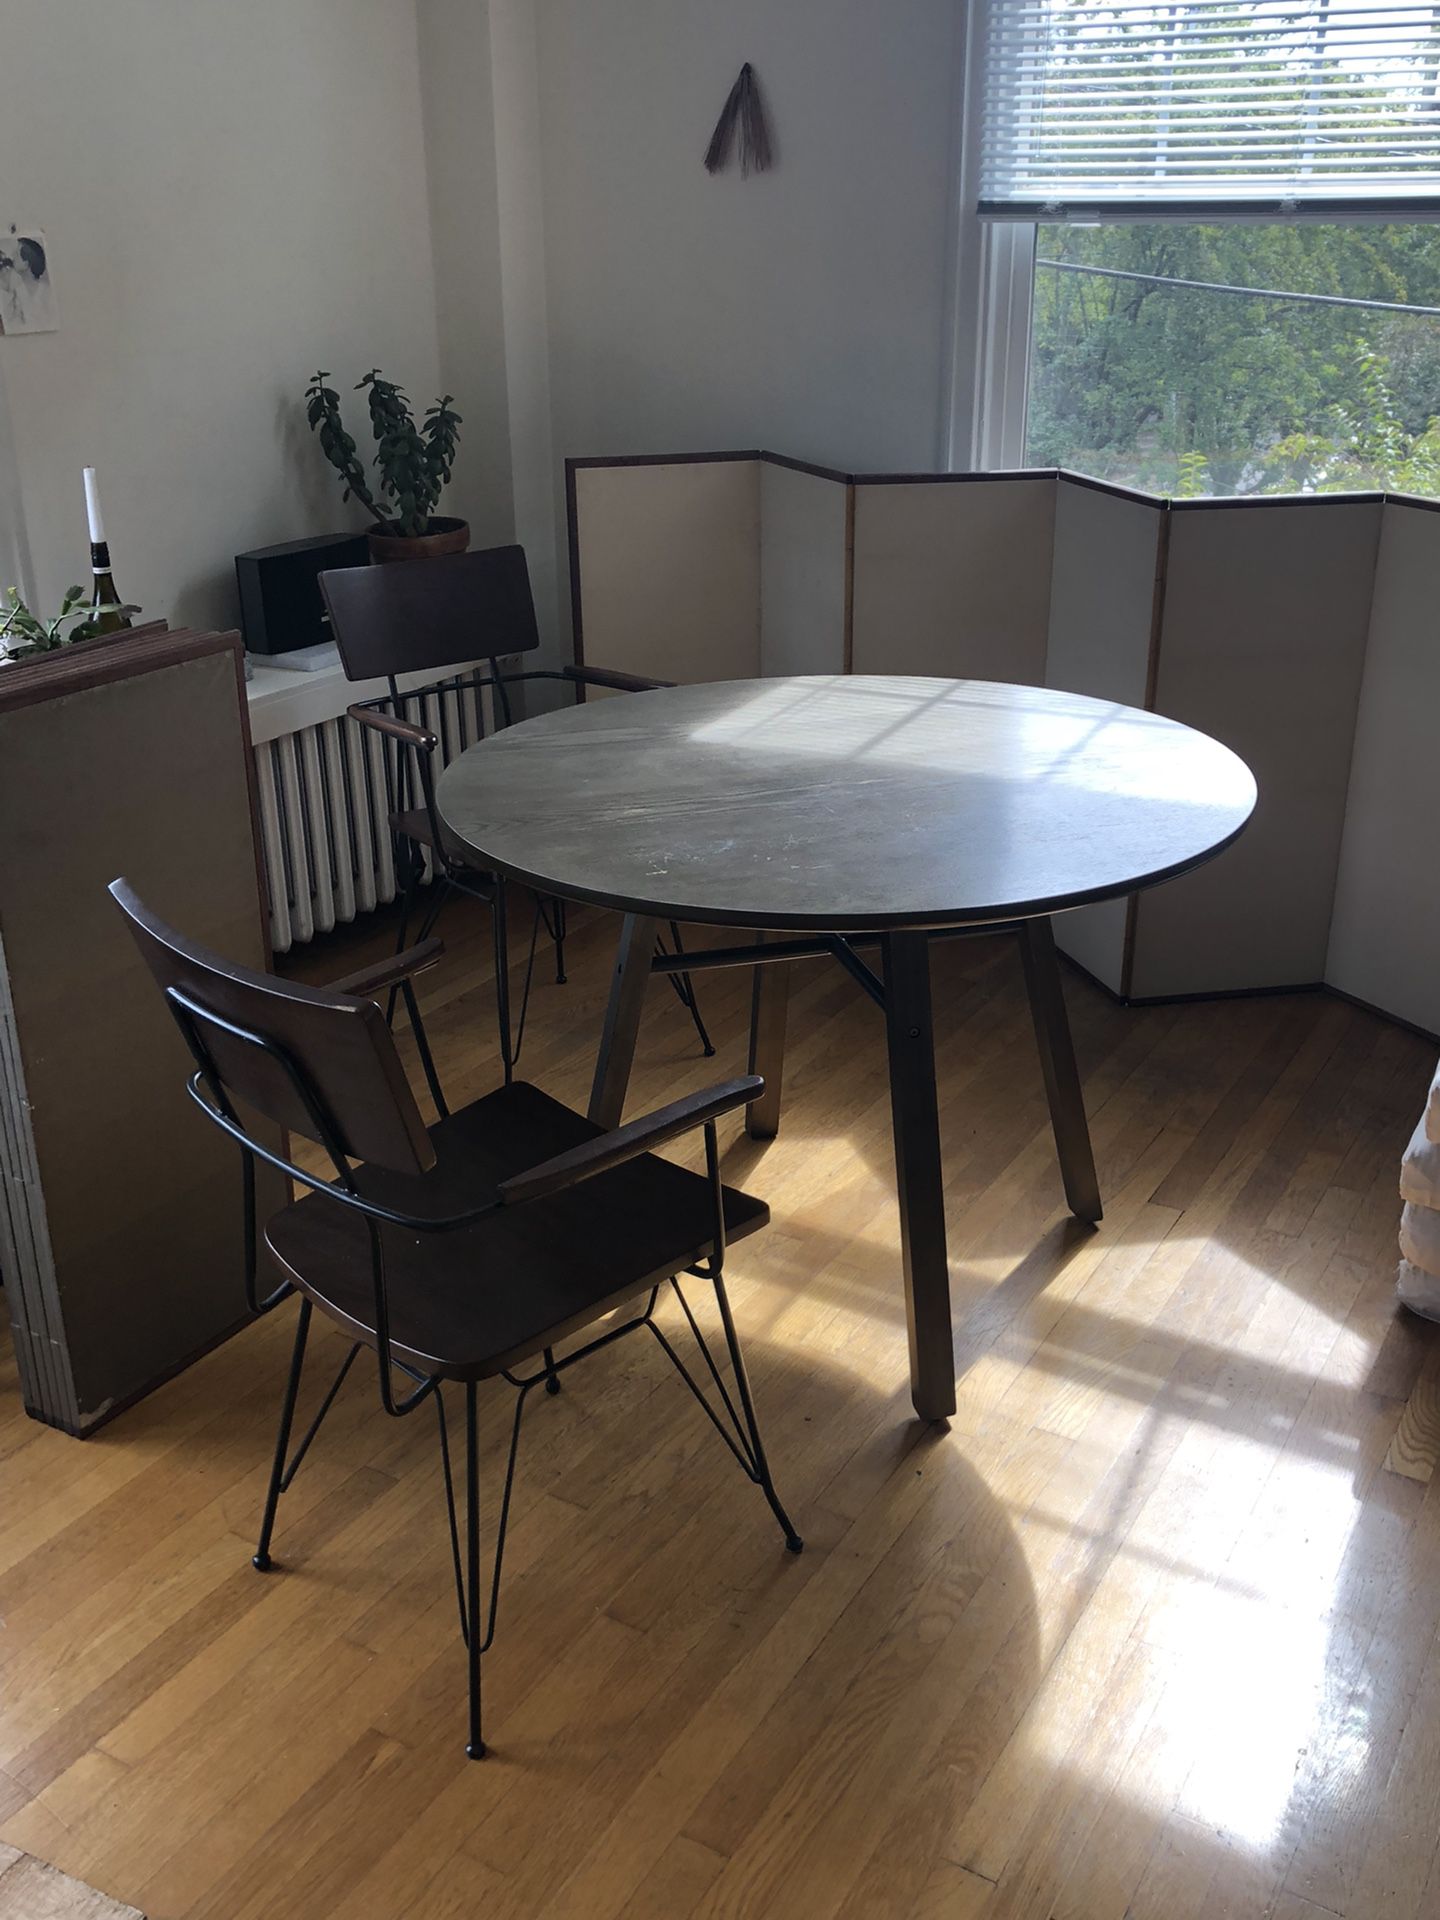 Crate&barrel Round Table And Two Chairs 